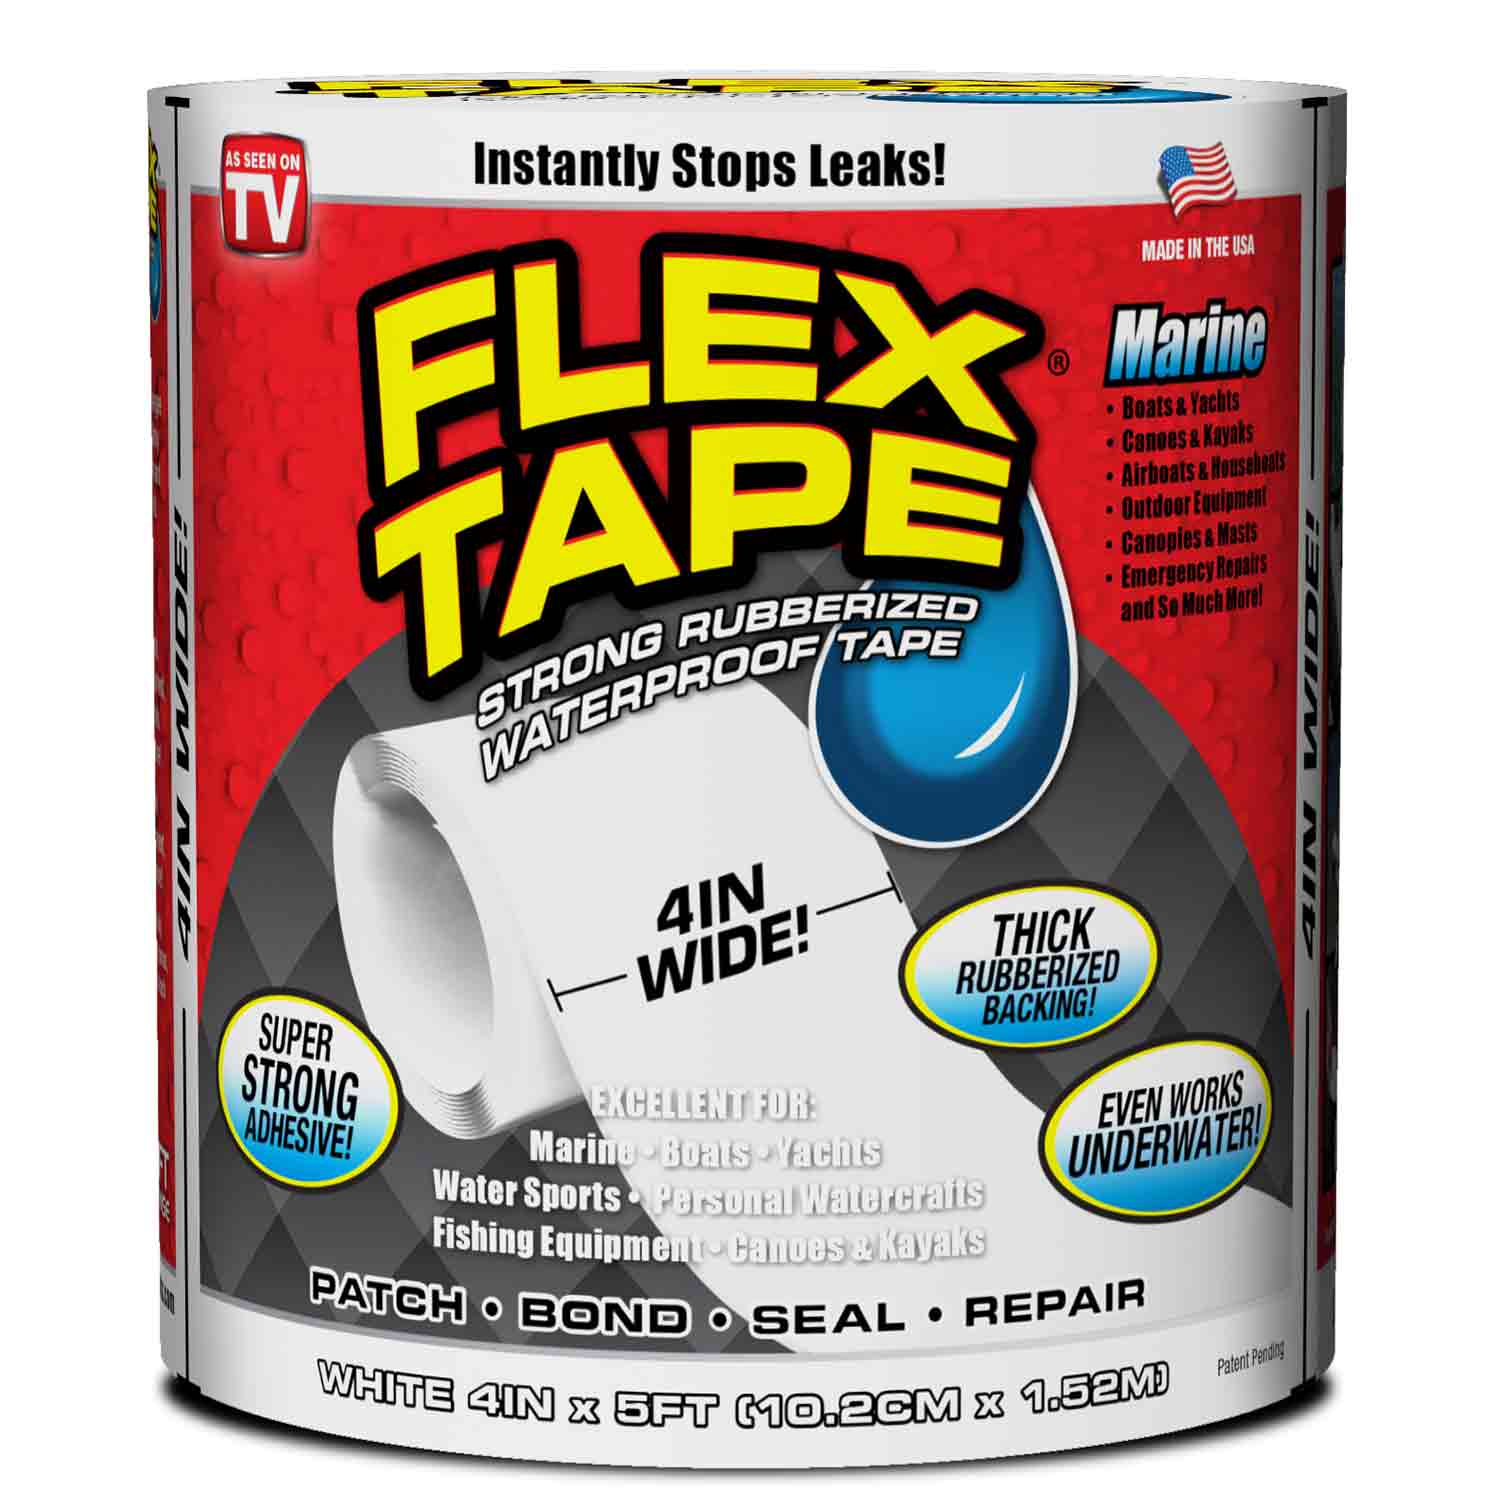 FLEX TAPE Clear Mini Waterproof Tape Patches, 3 x 4-In., 2-Pack